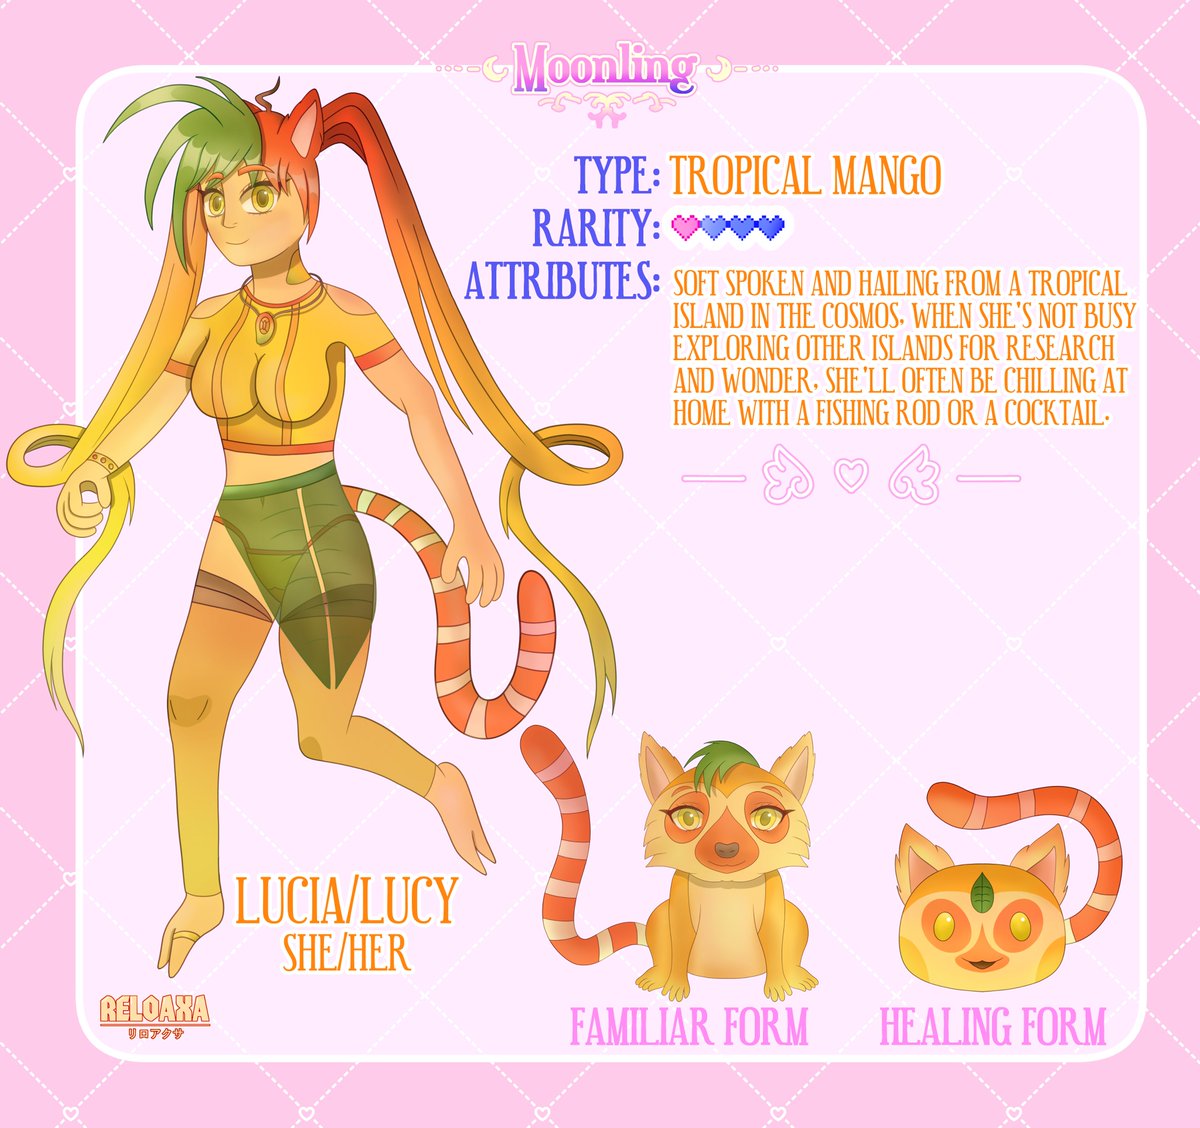 Say hewwo to my newest OC Lucia (or Lucy; she/her), a tropical mango-based moonling (species by the amazing @FIYUNAE created for community event hosted by her); I had a lot of fun making this cutie! 🥭🍸🌴❤️🧡💛💚